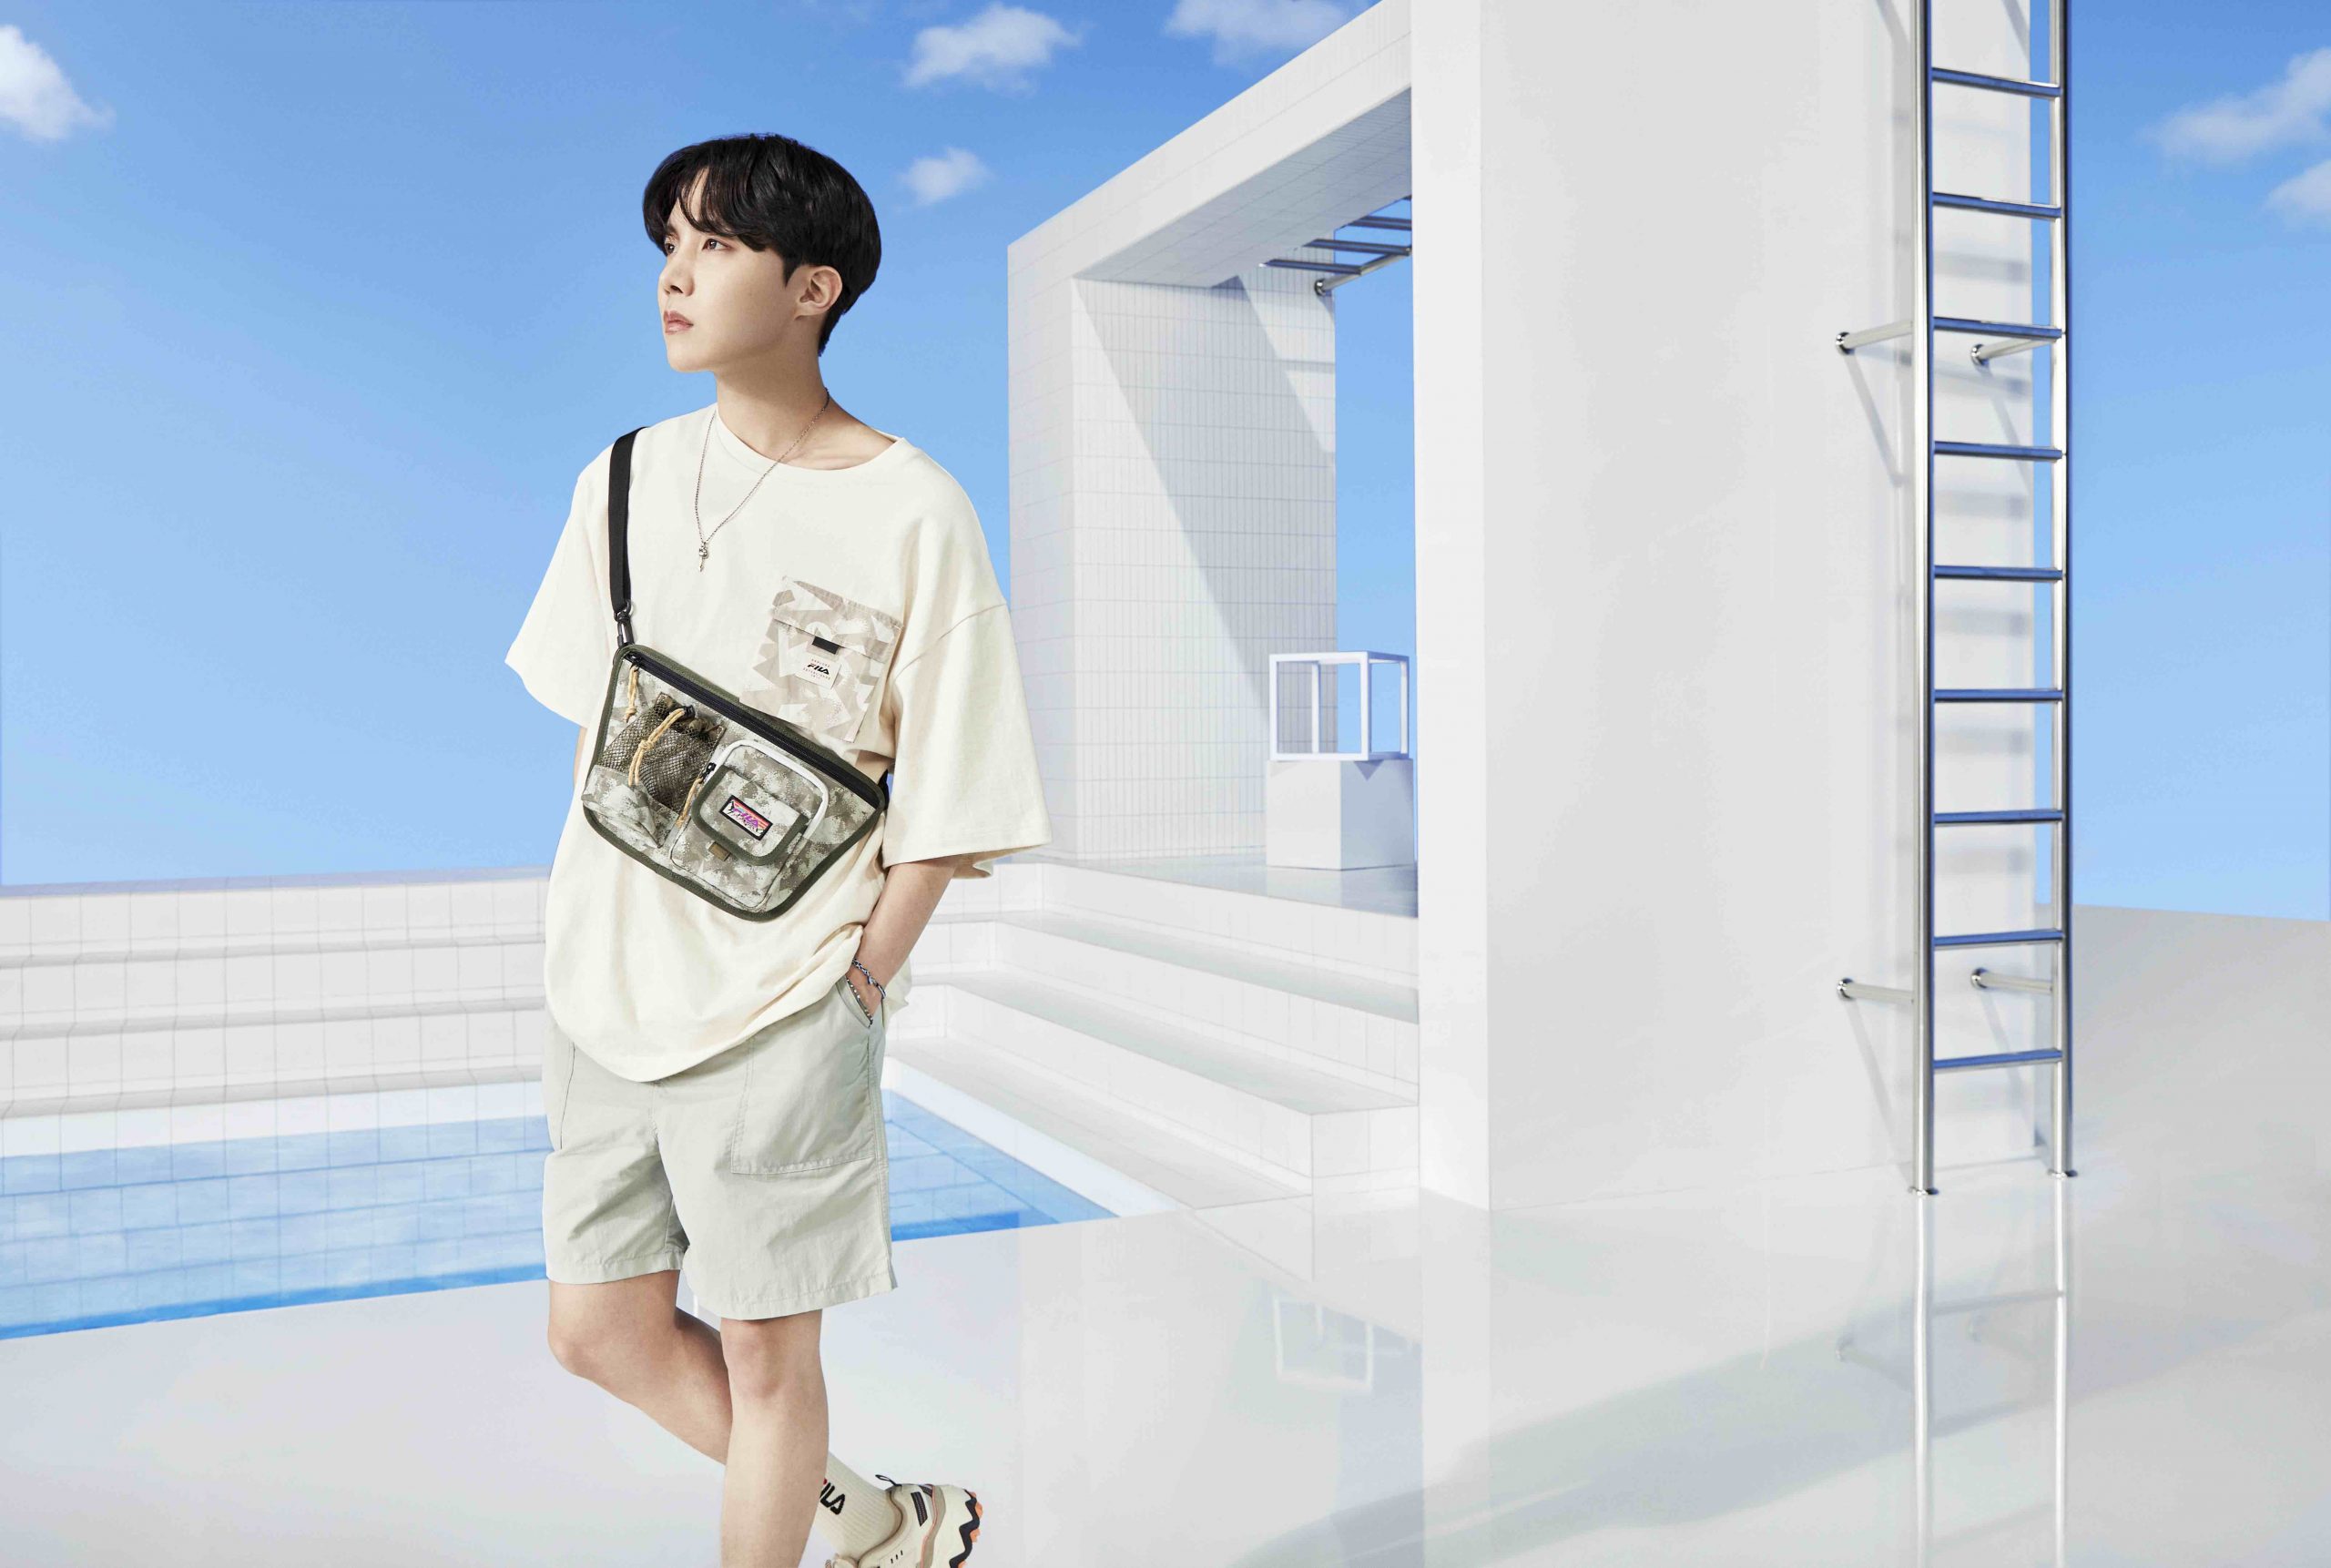 FILA – BỘ SƯU TẬP “THIS IS OUR SUMMER”